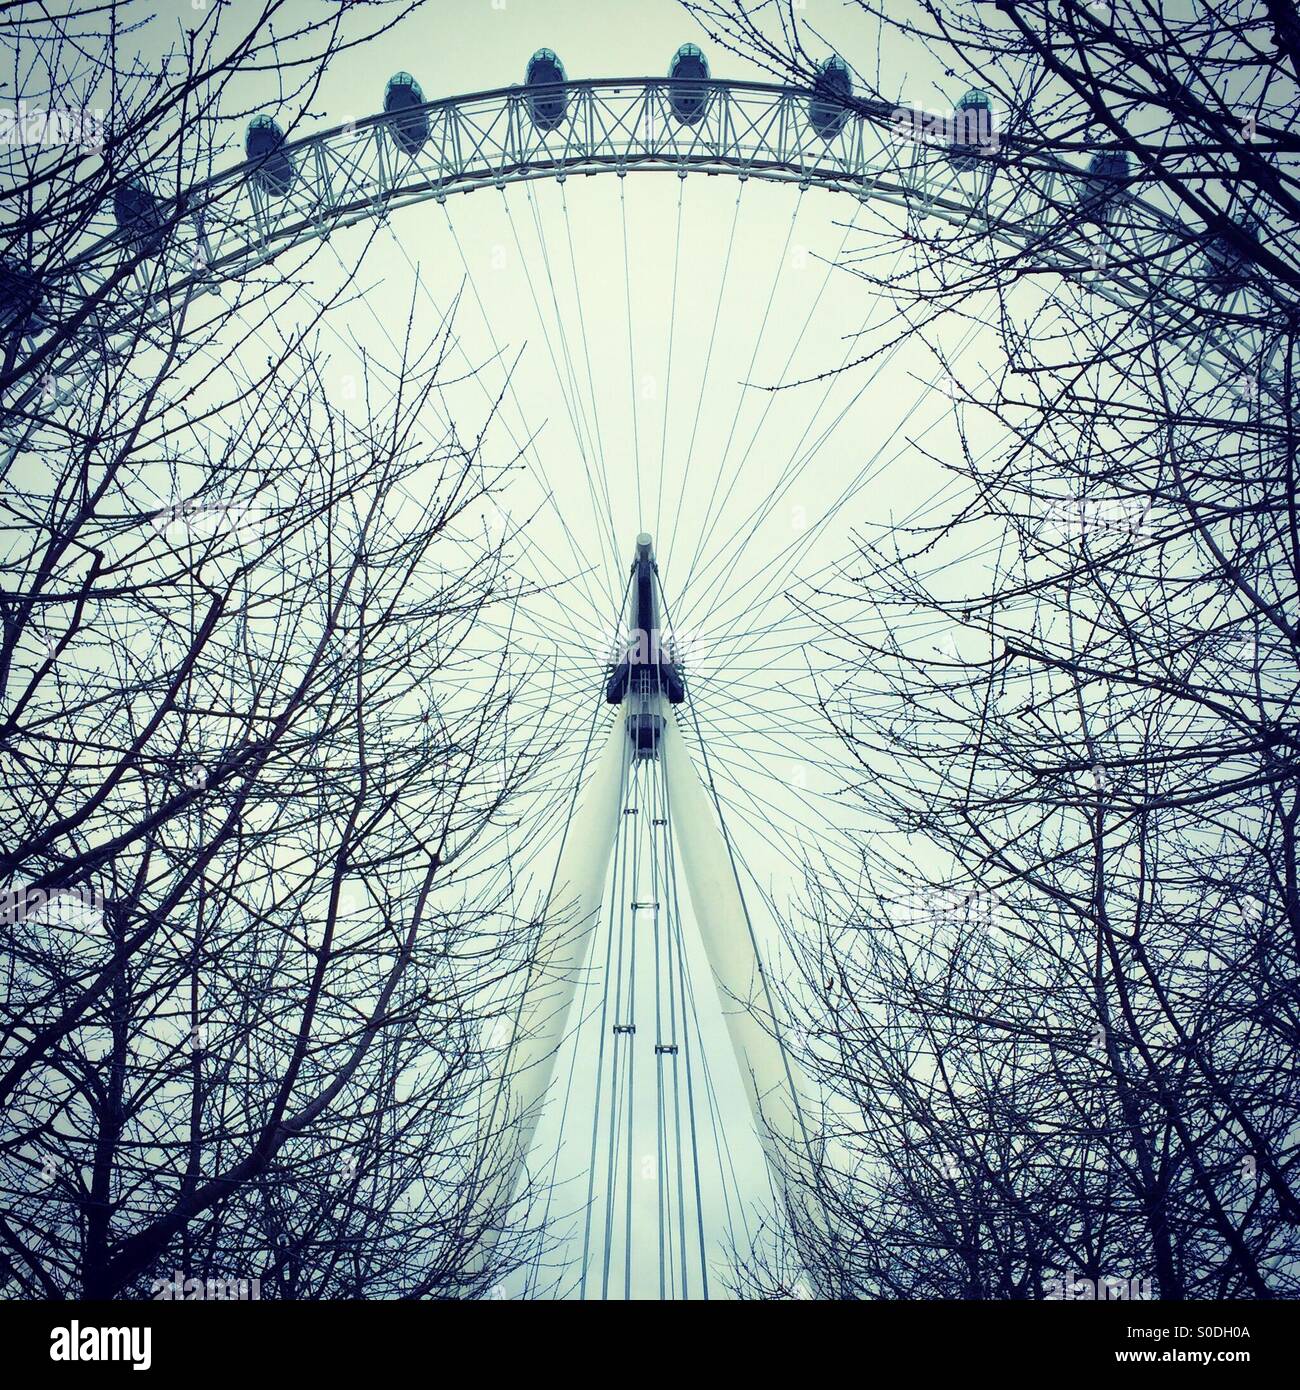 Looking up through the trees at the London Eye Stock Photo